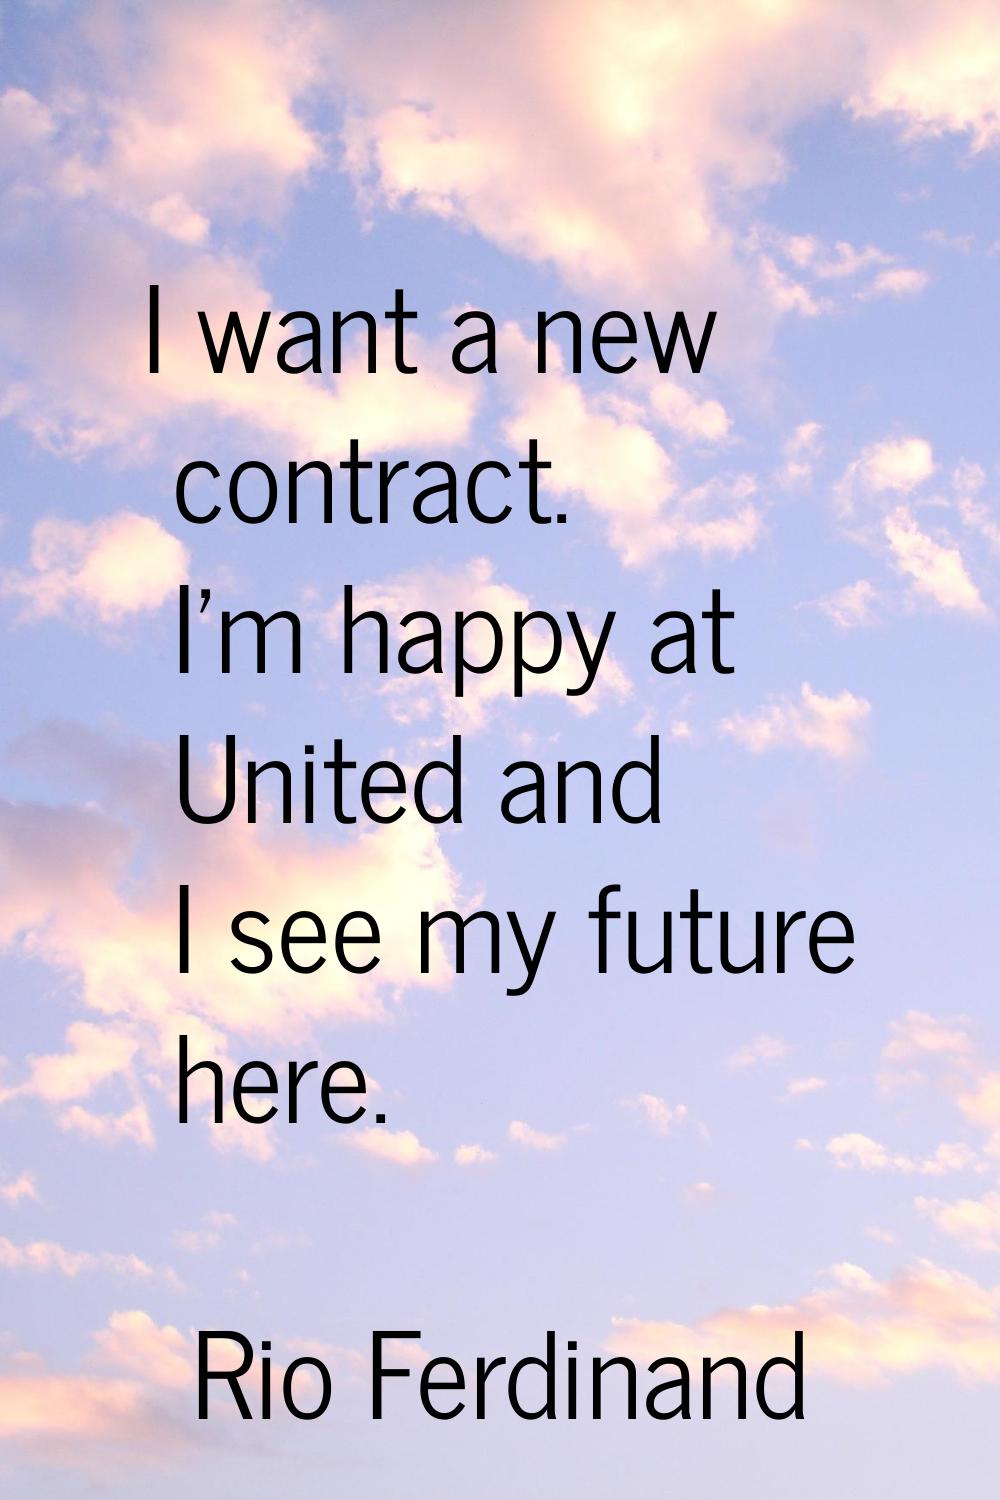 I want a new contract. I'm happy at United and I see my future here.